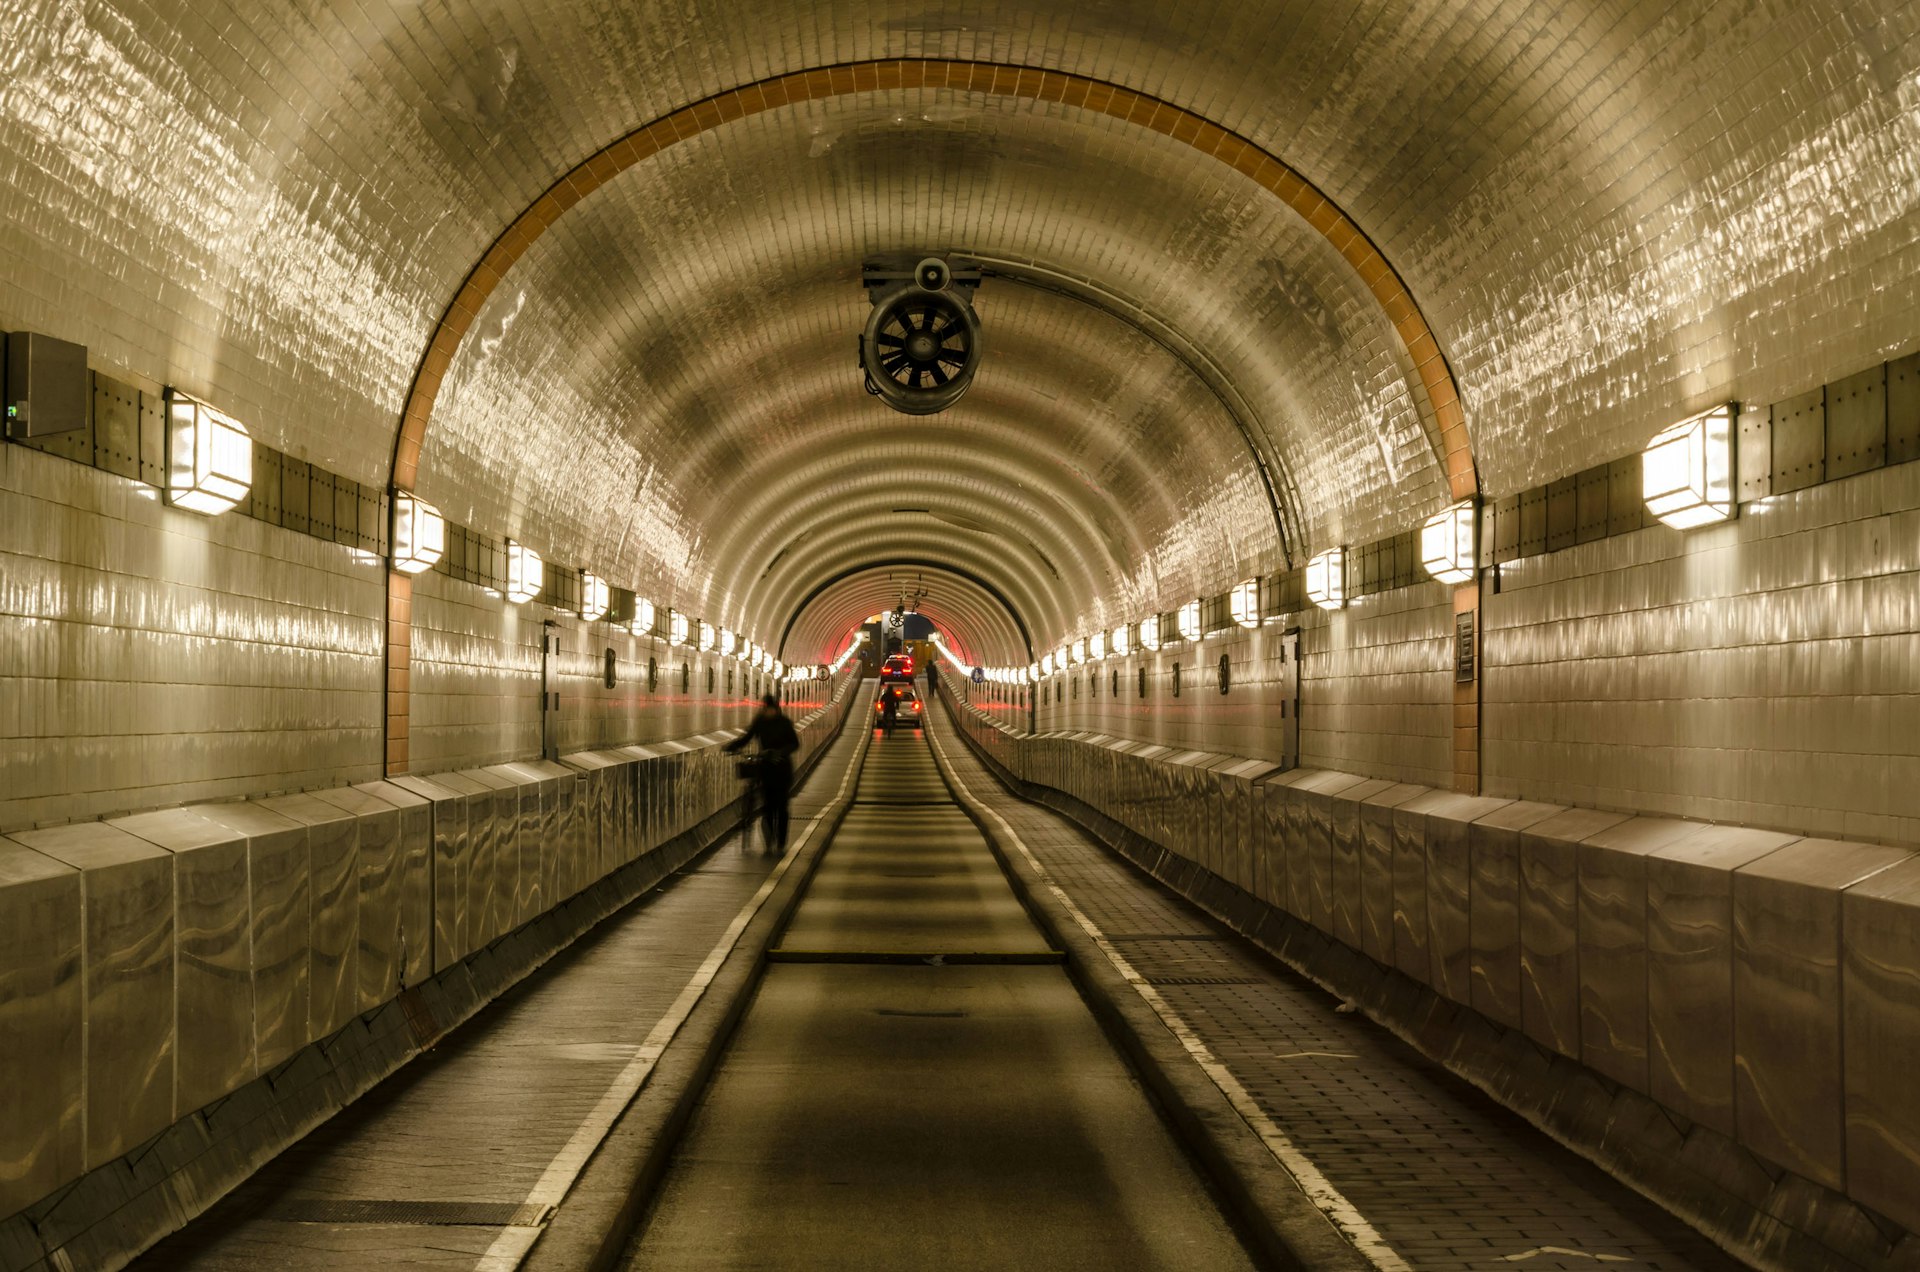 An image taken inside the Old Elbe Tunnel, Hamburg. The domed tunnel is tiled with white and black tiles and illuminated by old-fashioned lights every few metres. someone is wheeling their bike through the tunnel and in the far distance we can see red brake lights. 